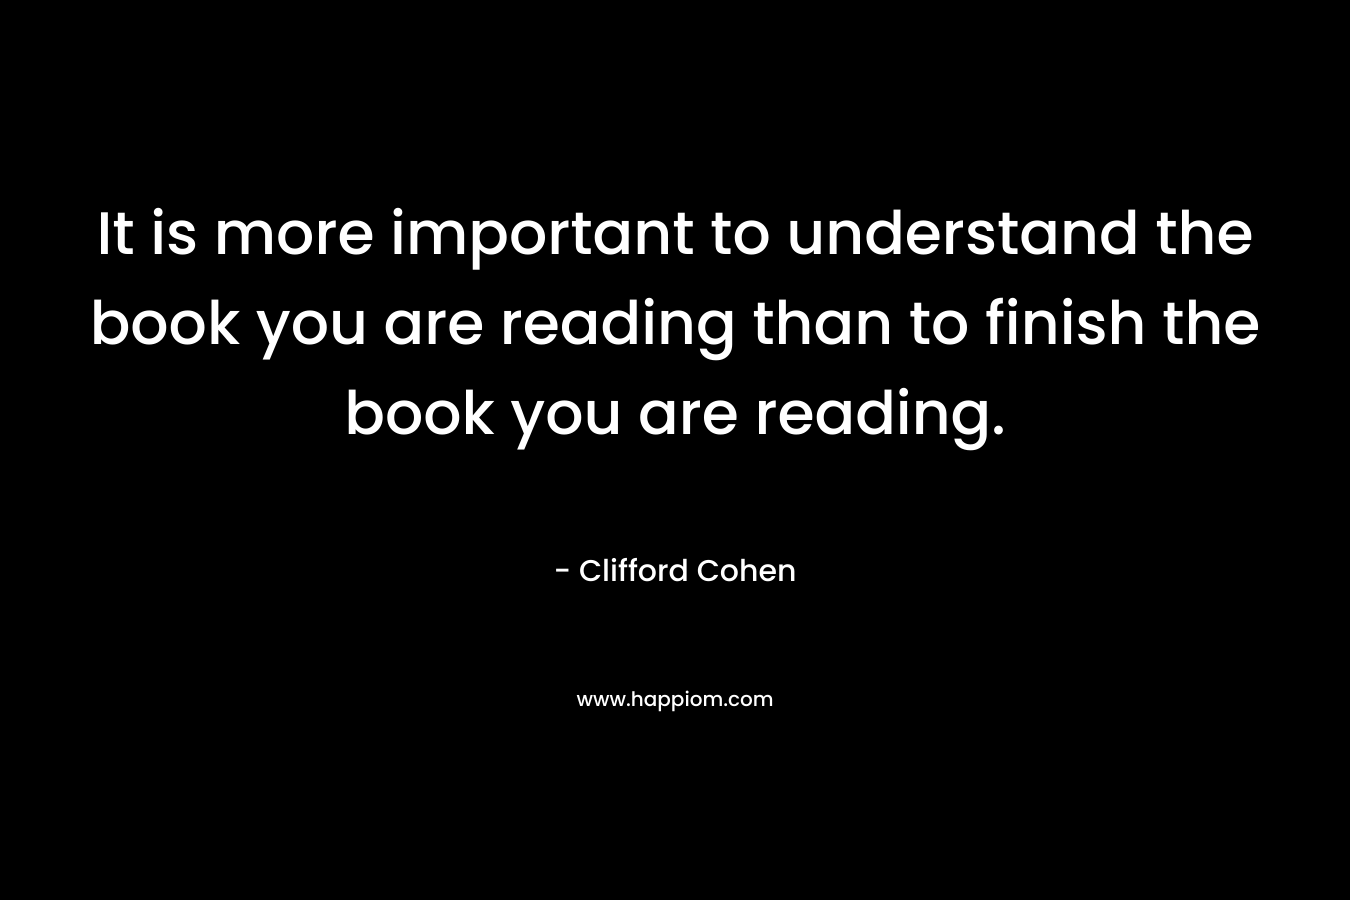 It is more important to understand the book you are reading than to finish the book you are reading.